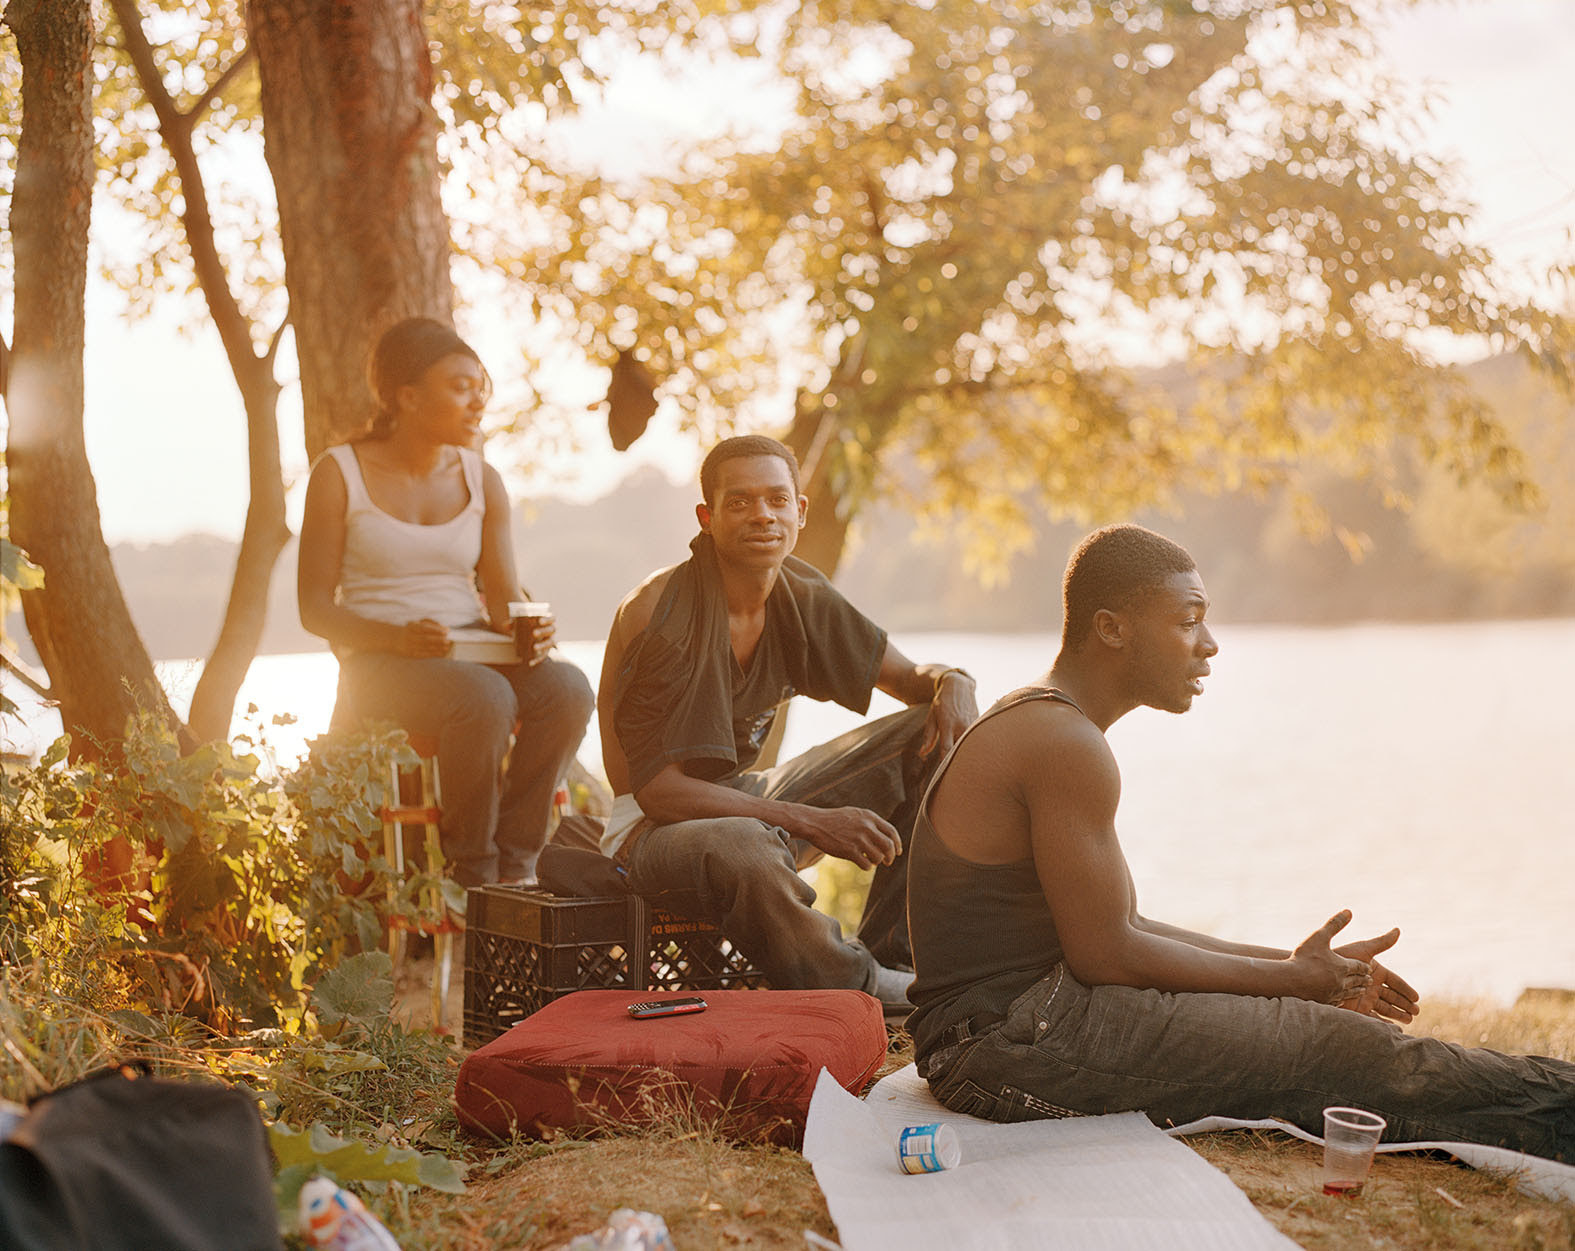 Three people sitting outside in a park at sunset with a picnic